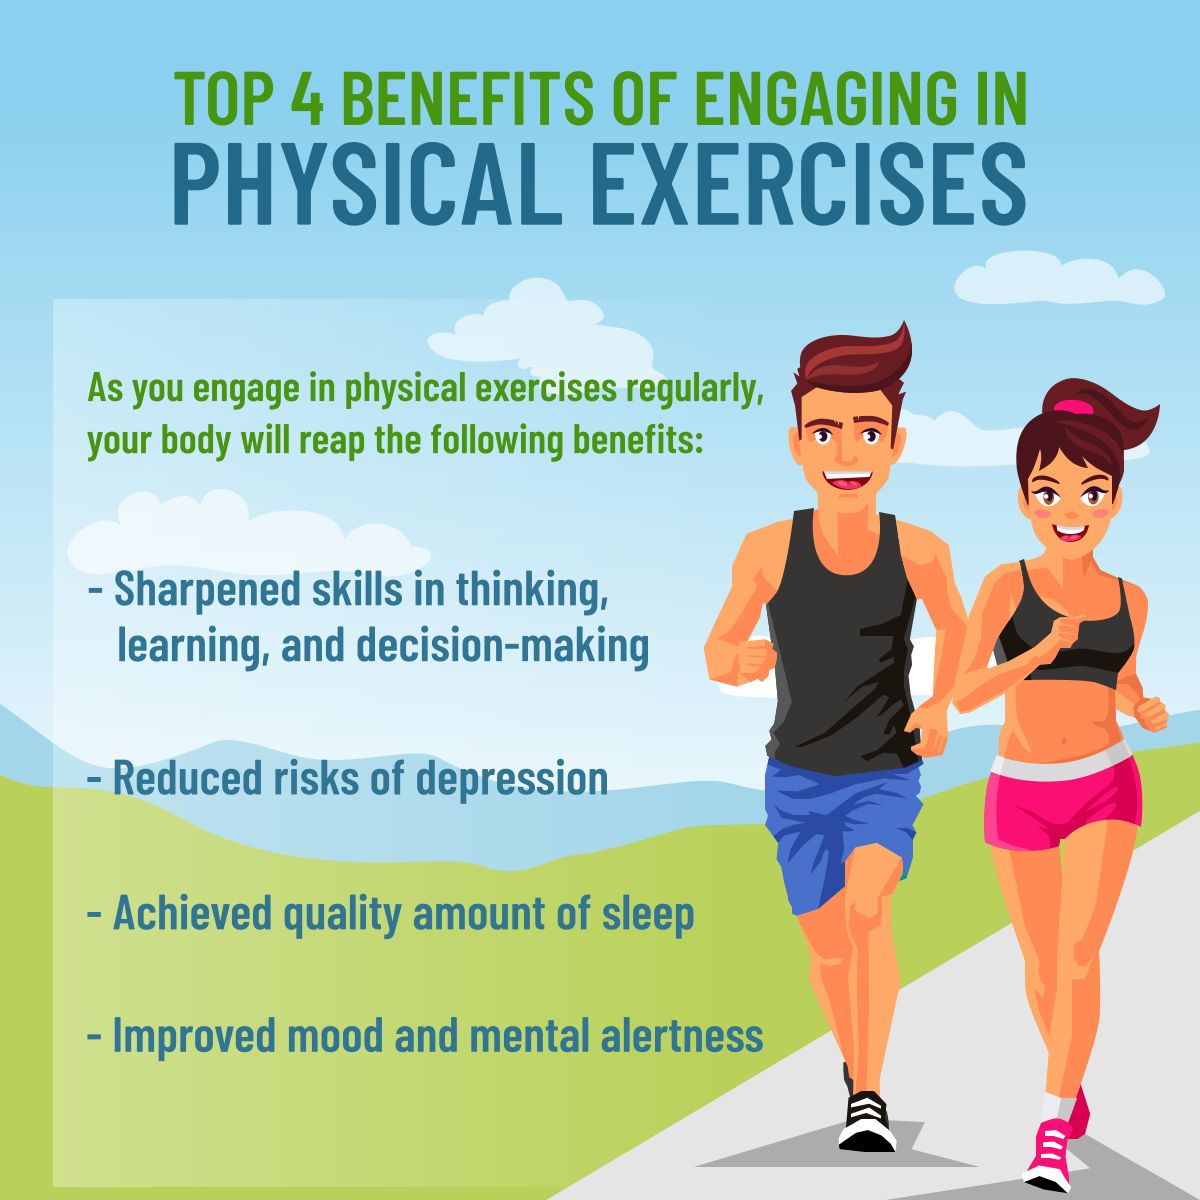 Mental exercise health benefits brain infographic does physical activity fitness improve helps wellbeing tips articles mood quotes facts depression stress